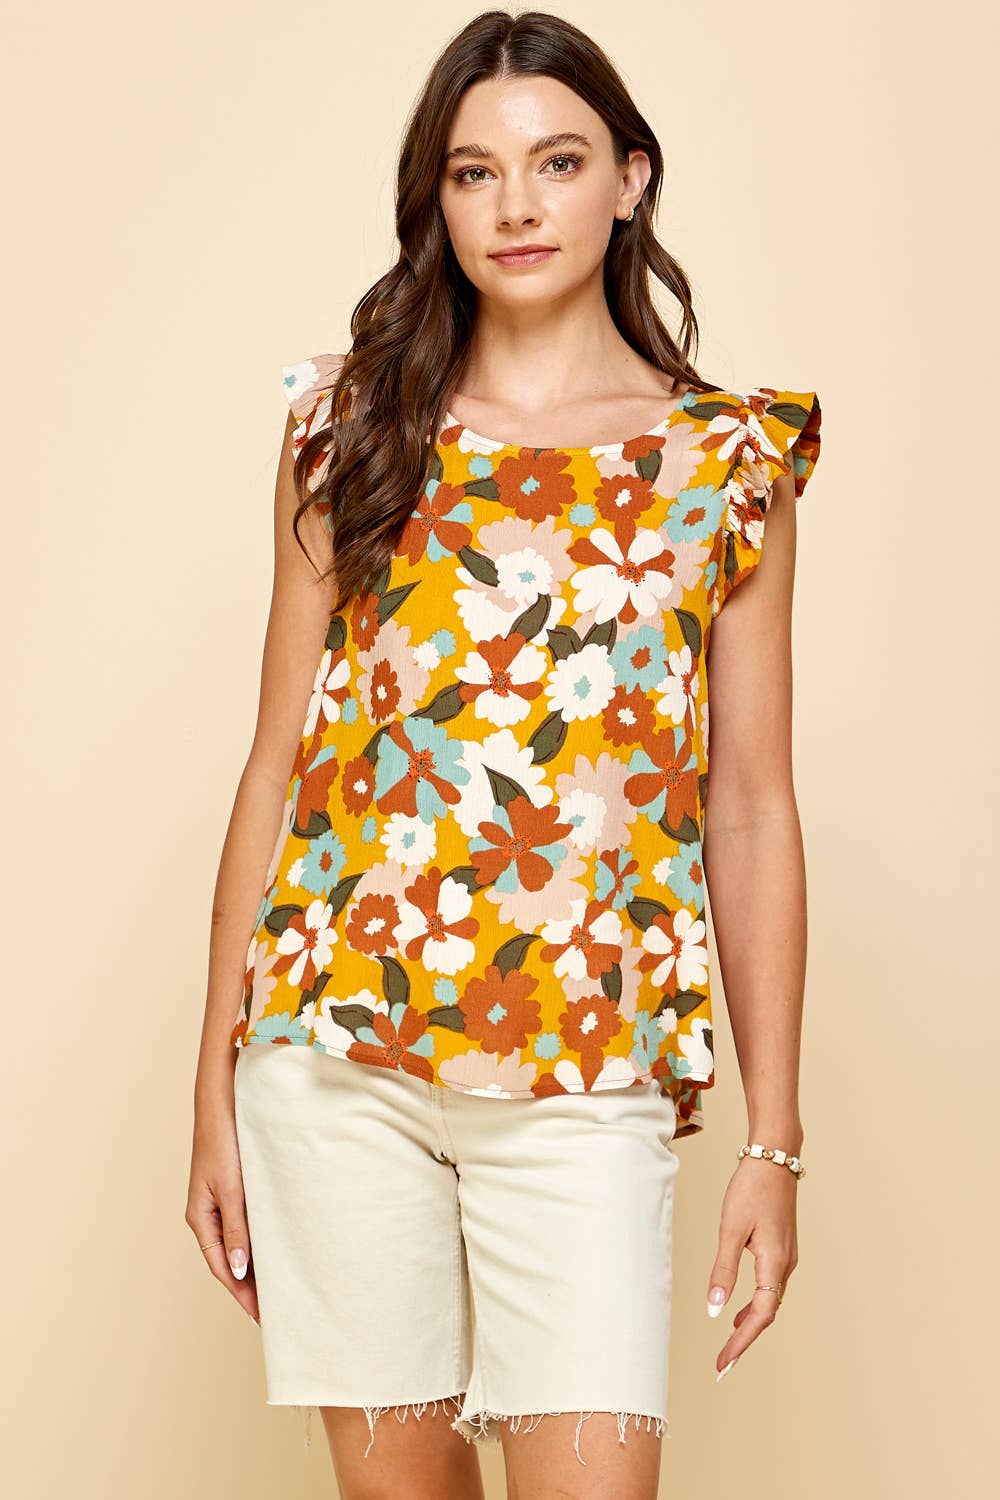 Floral Sleeveless Top with Ruffled Sleeves in Ivory--Lemons and Limes Boutique